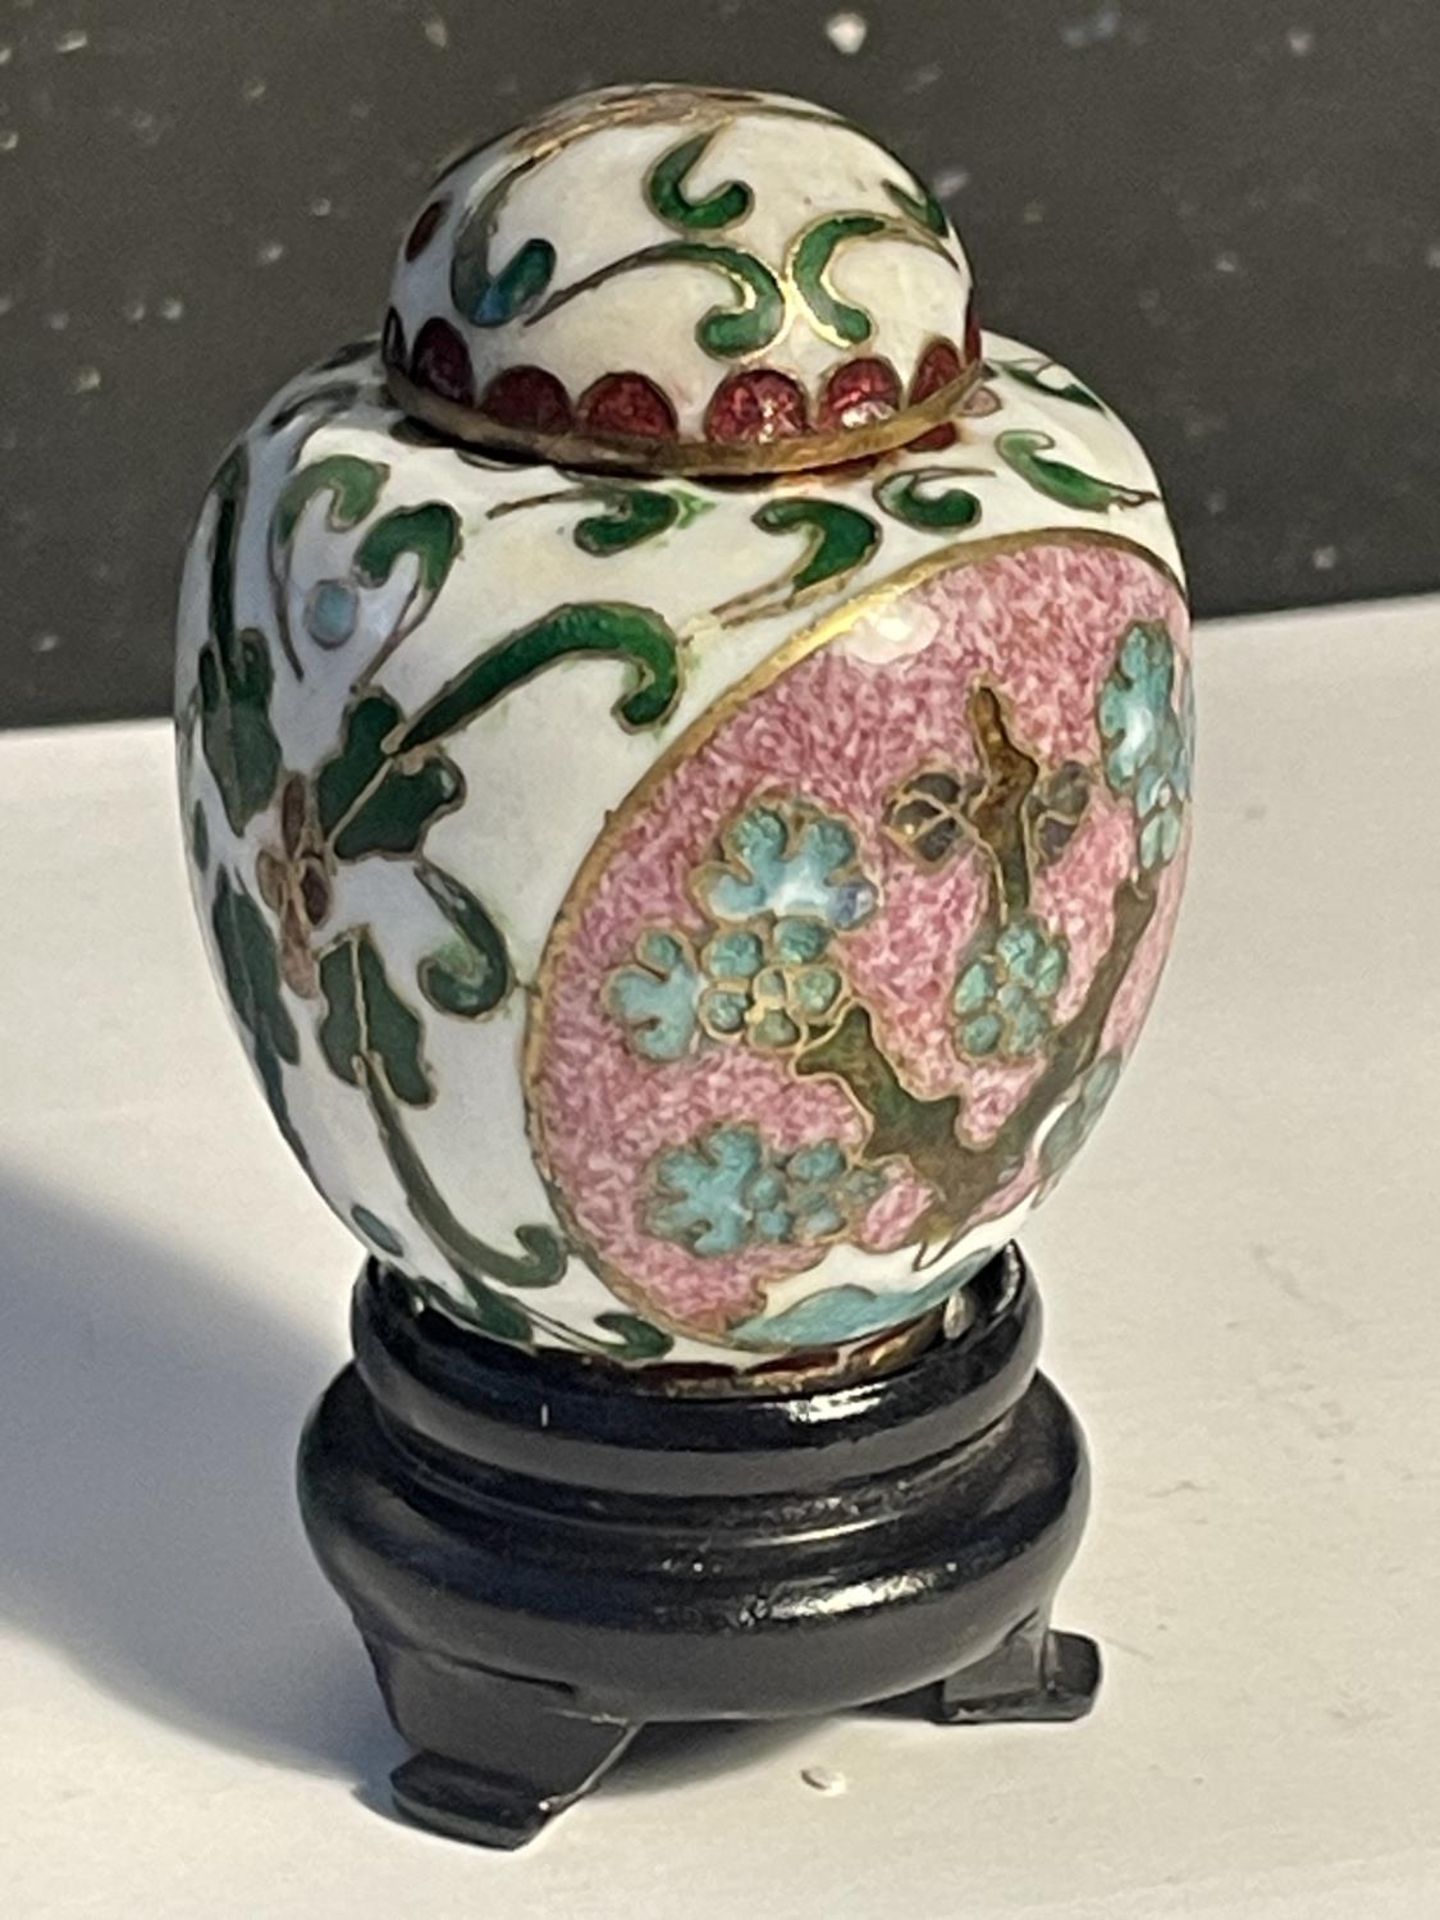 A MINIATURE CLOISONNE LIDDED GINGER JAR ON A WOODEN STAND - Image 3 of 4